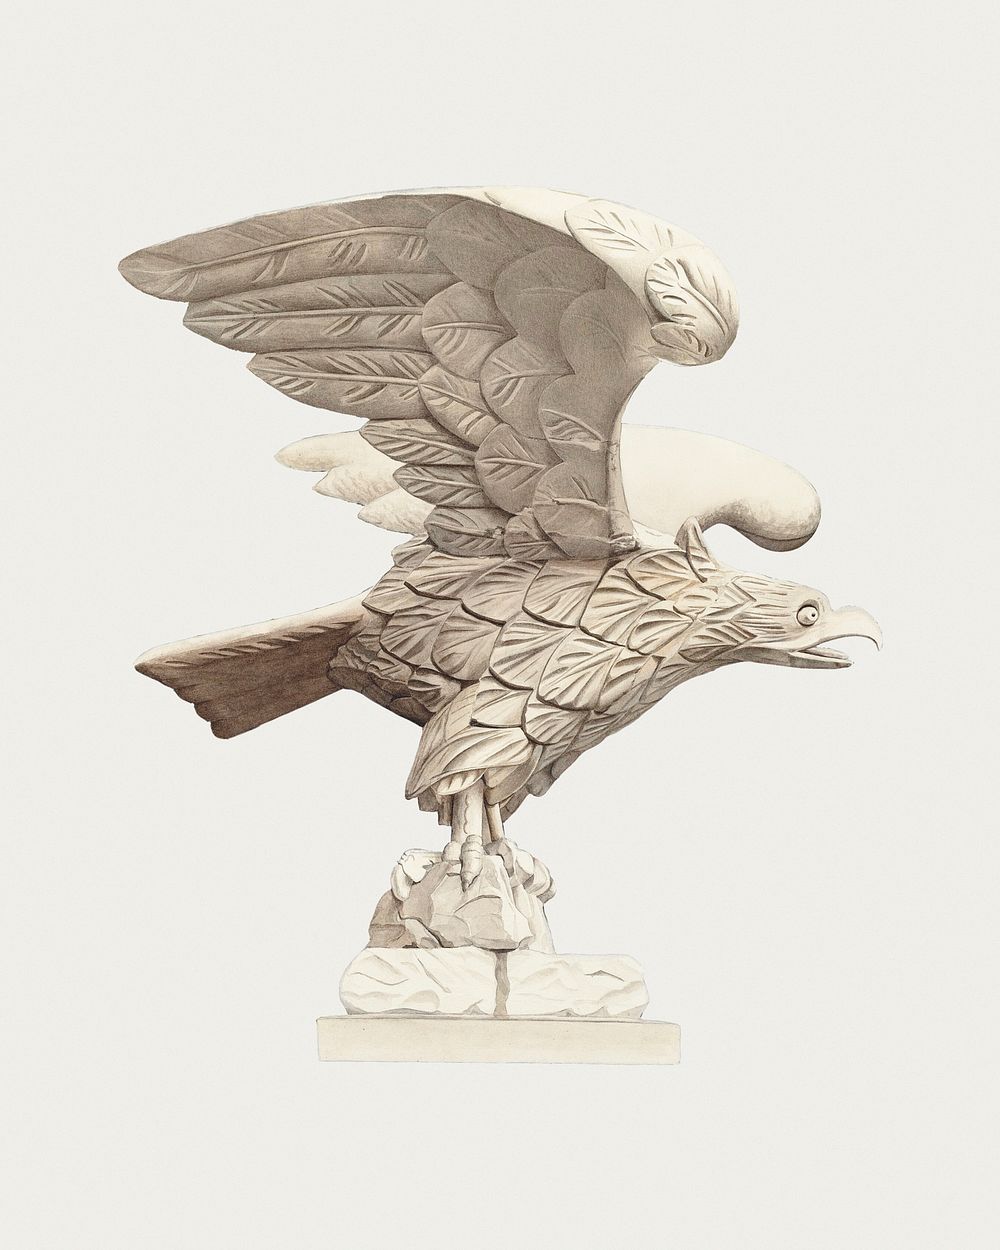 Vintage wooden eagle psd illustration, remixed from the artwork by Henry Murphy